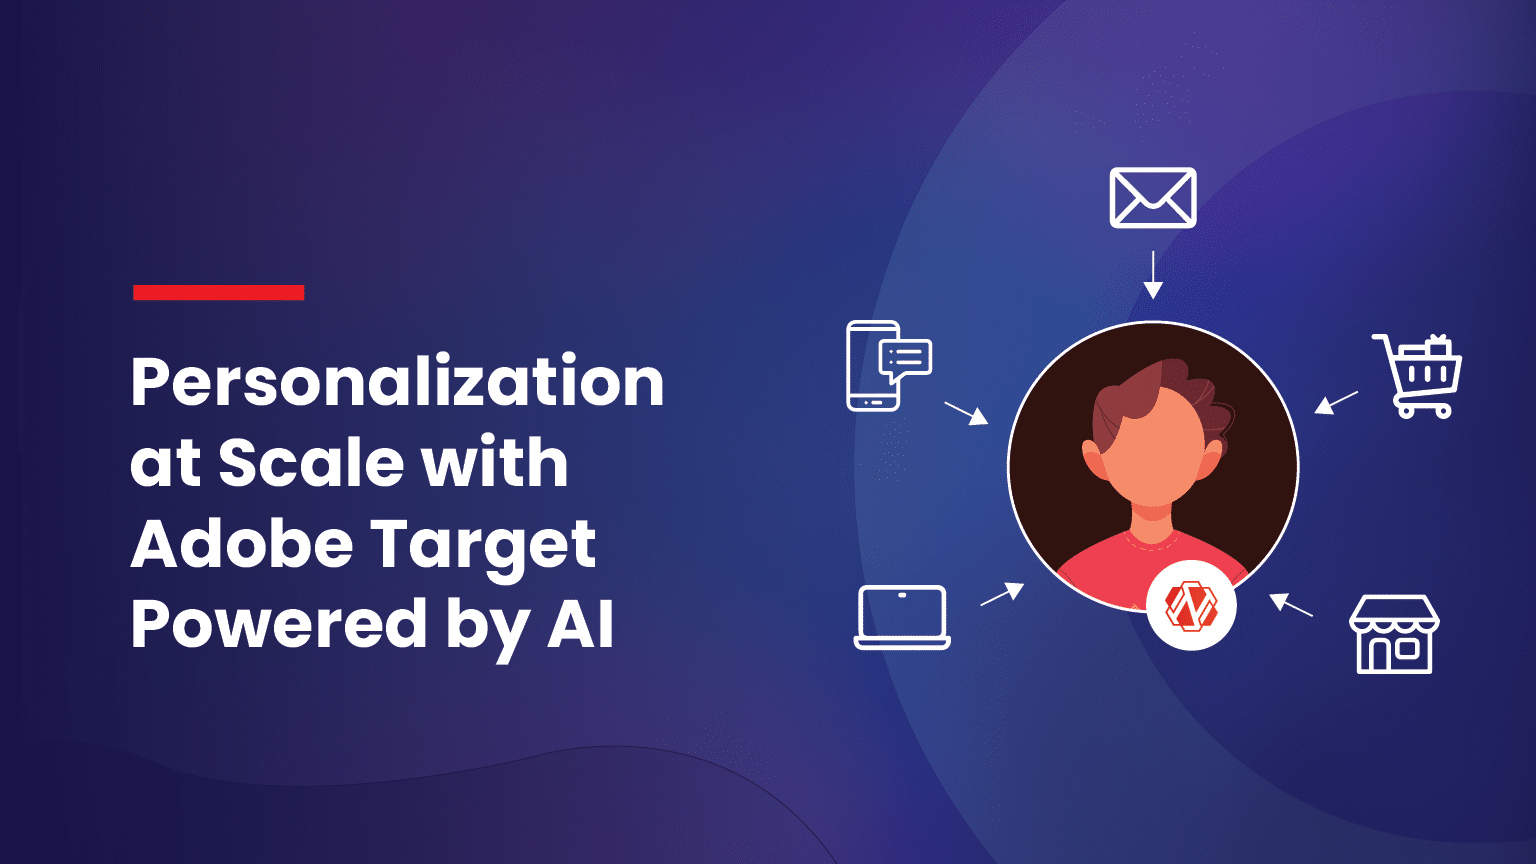 Adobe Target Personalization at scale Powered by AI.